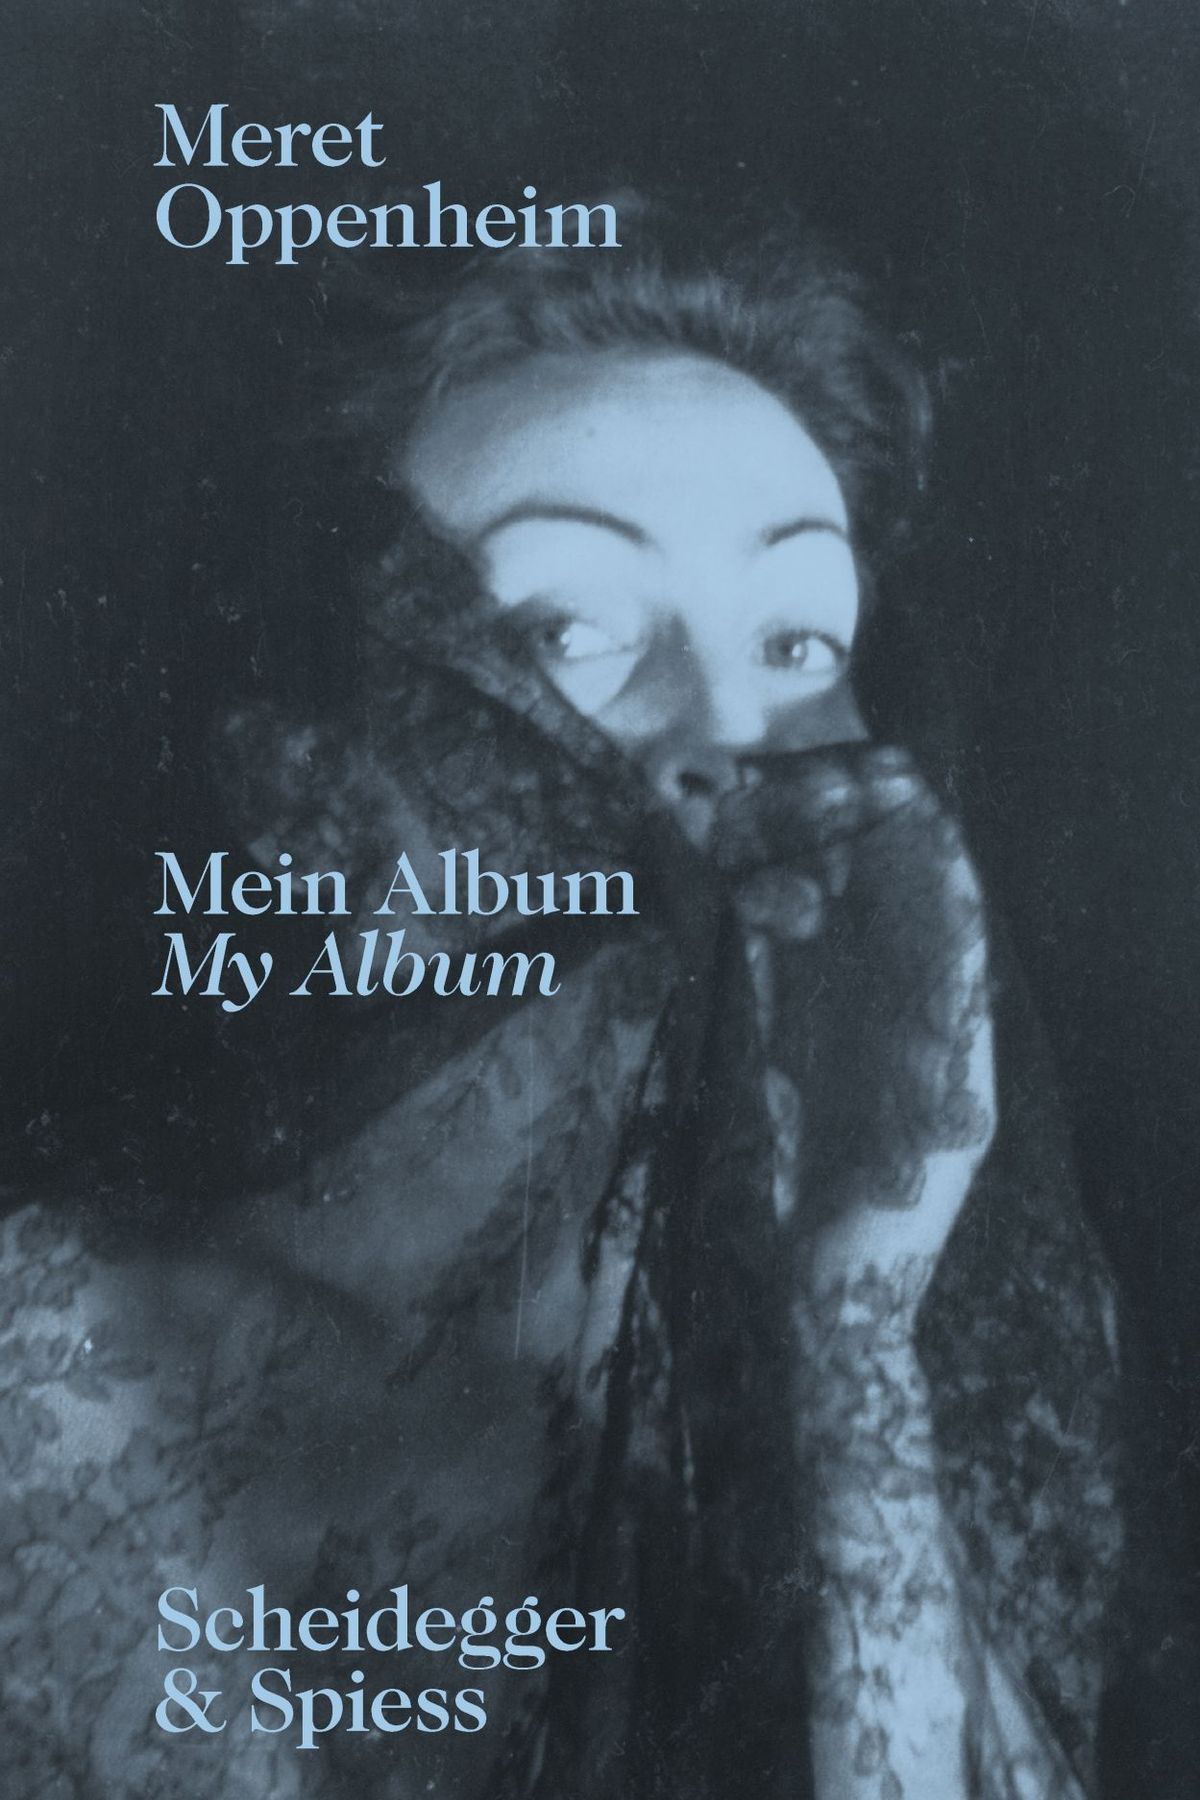 The front cover of Meret Oppenheim, Mein Album/My Album: The Autobiographical Album From Childhood until 1943 and a Handwritten Biography



